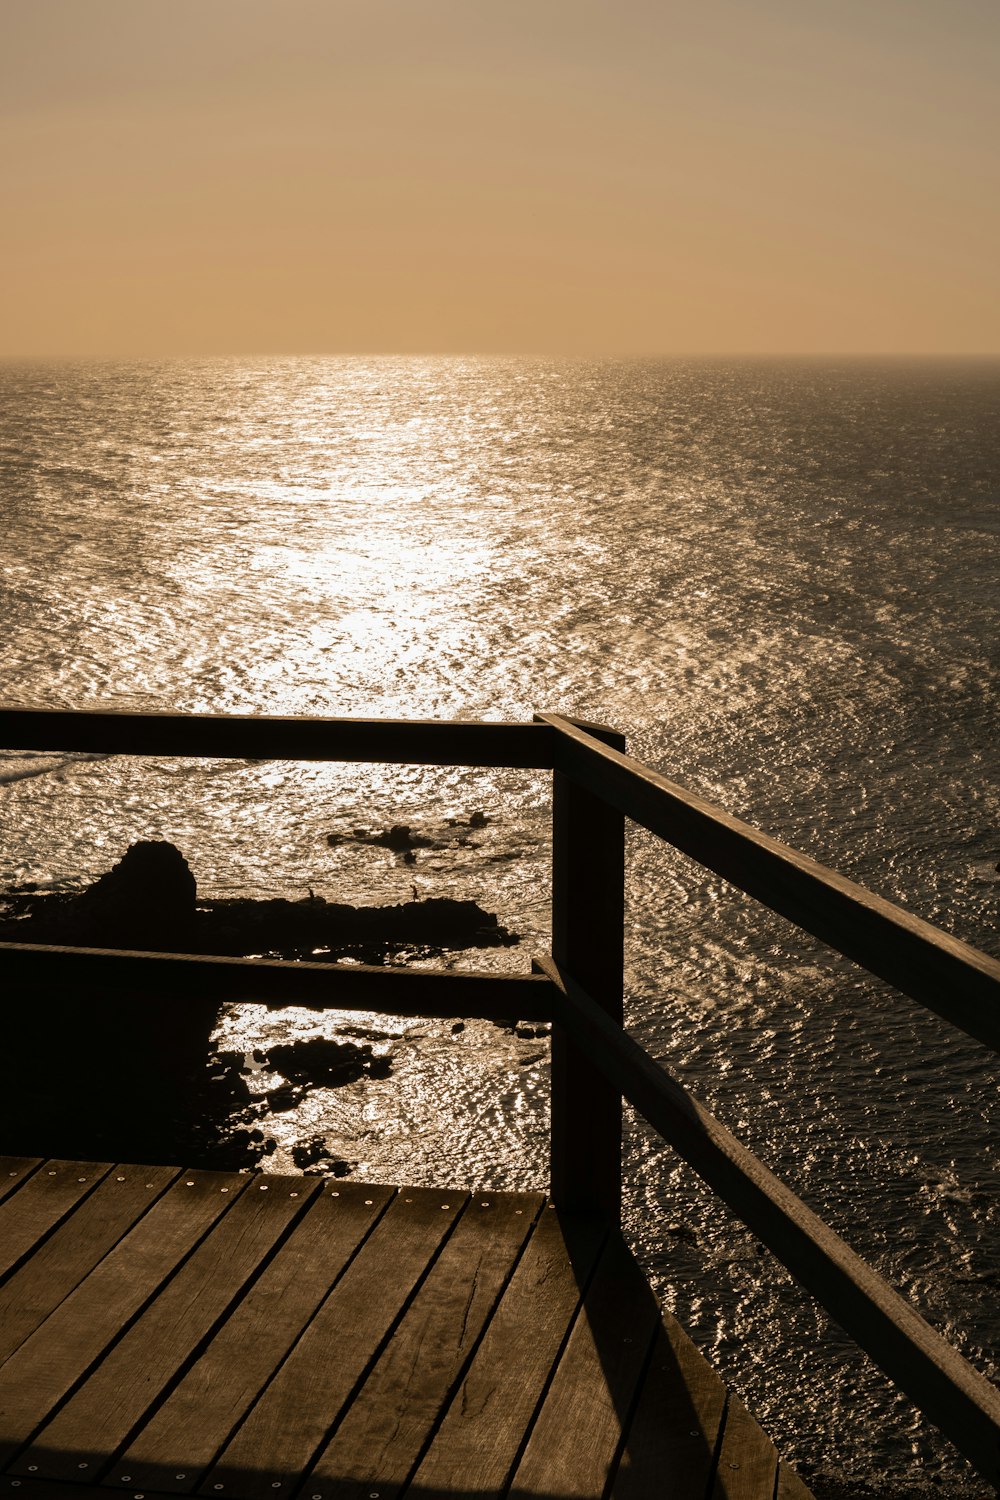 silhouette of person sitting on stairs near body of water during daytime